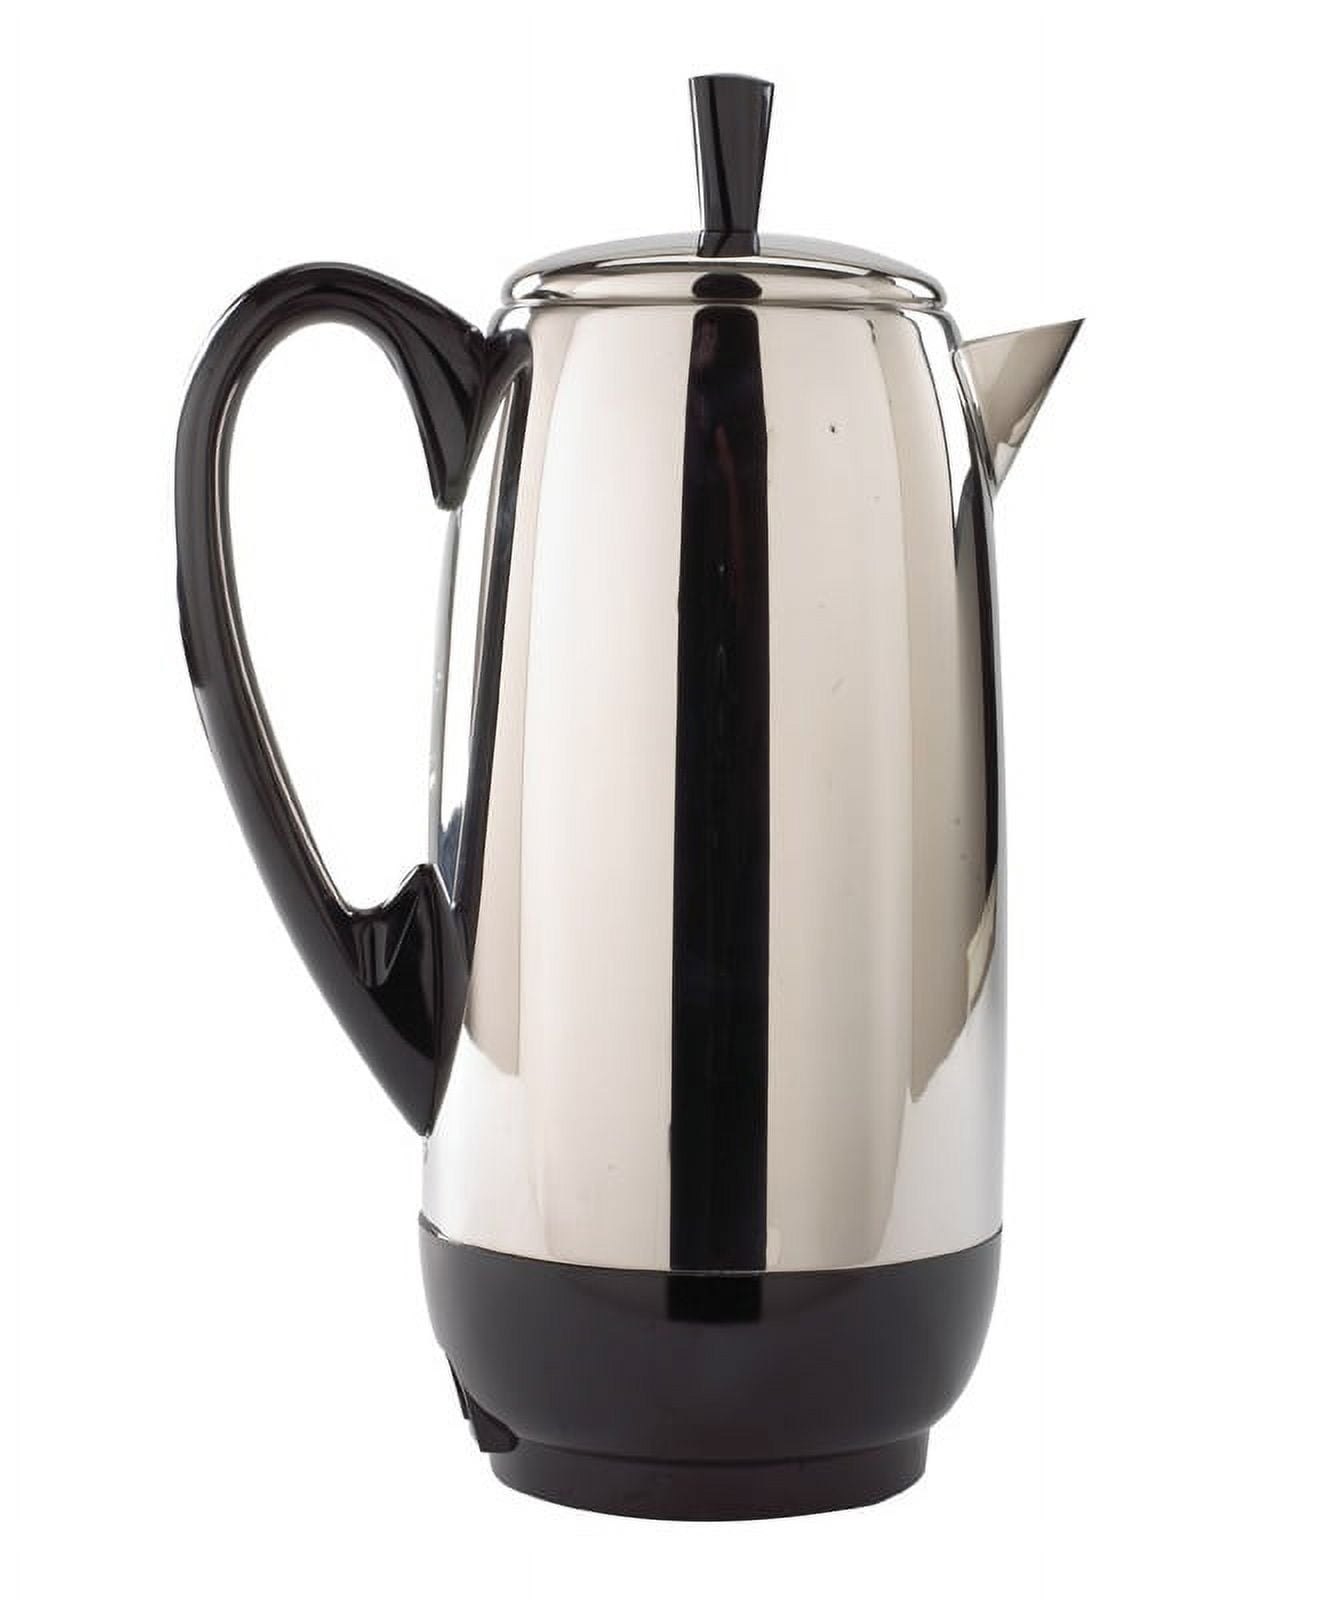 Farberware 4 Cup Stainless Steel Coffee Percolator - Power Townsend Company